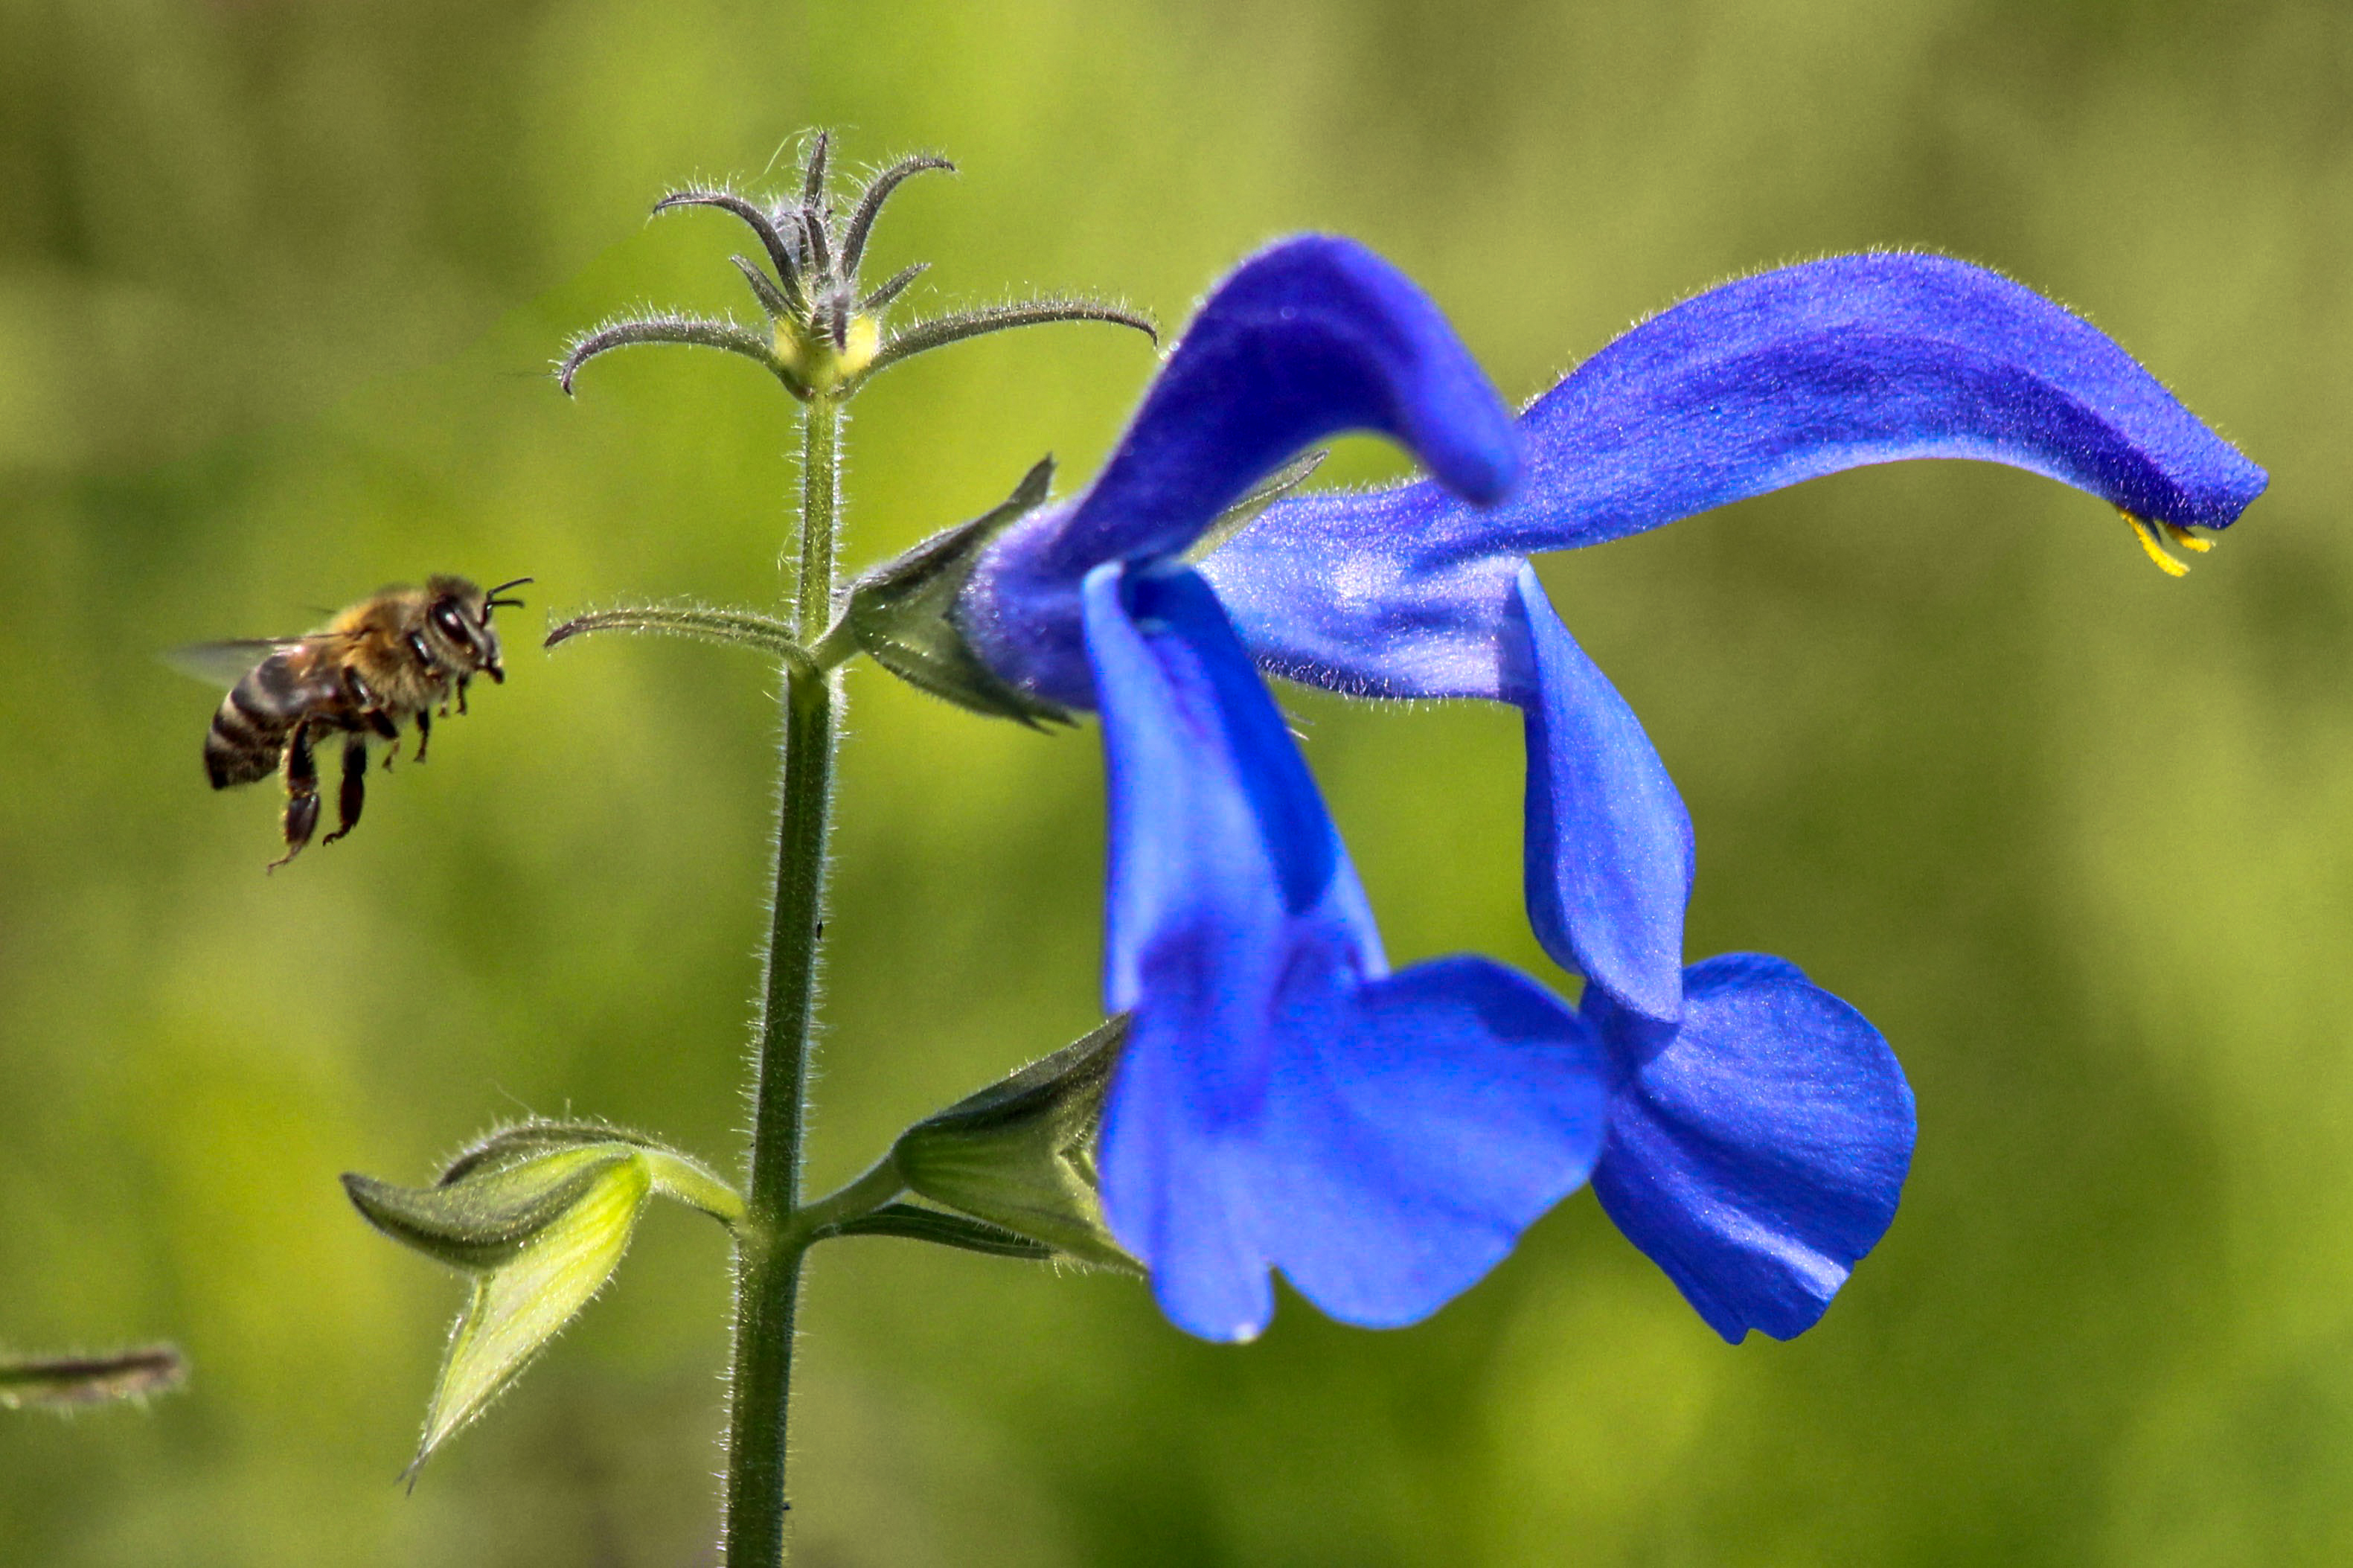 Close up photo of a bee flying towards a blue flower